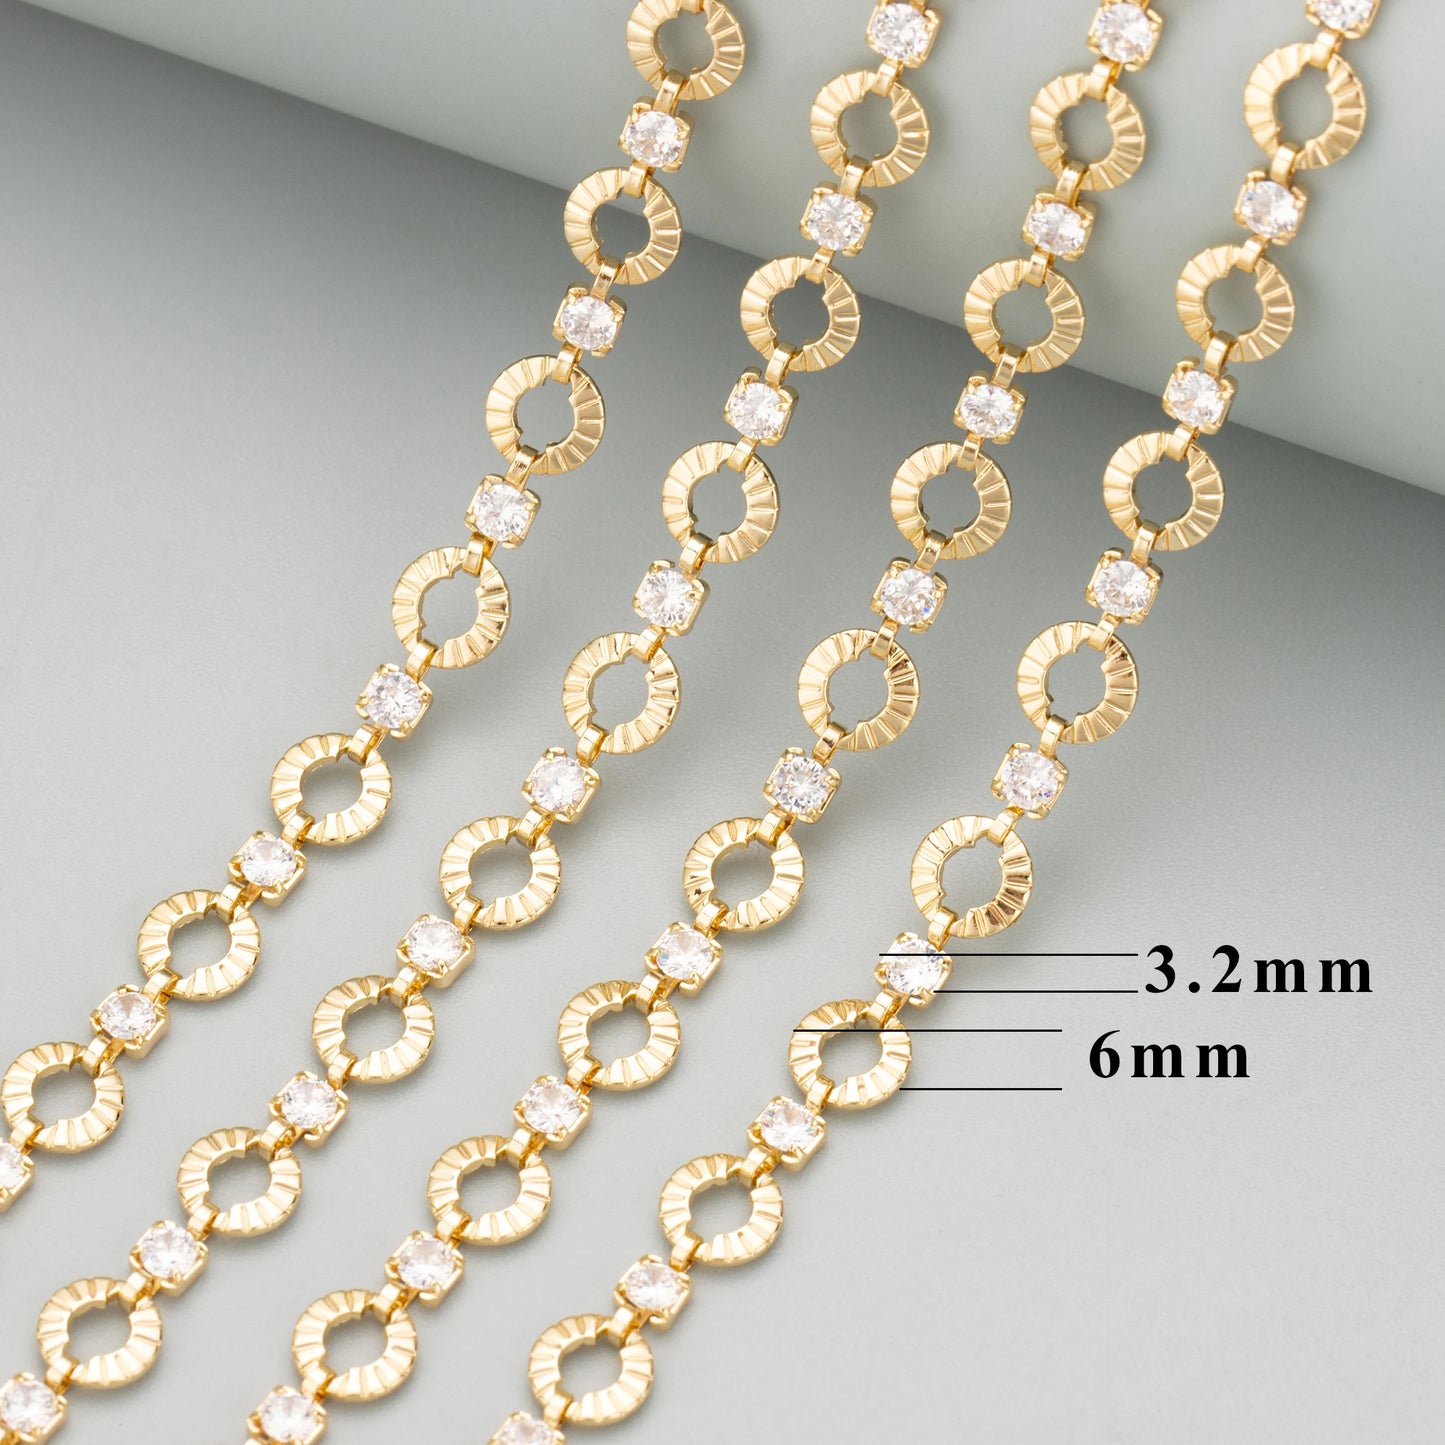 GUFEATHER C349,chain,18k gold rhodium plated,copper,nickel free,zircons,charms,diy bracelet necklace,jewelry making,1m/lot